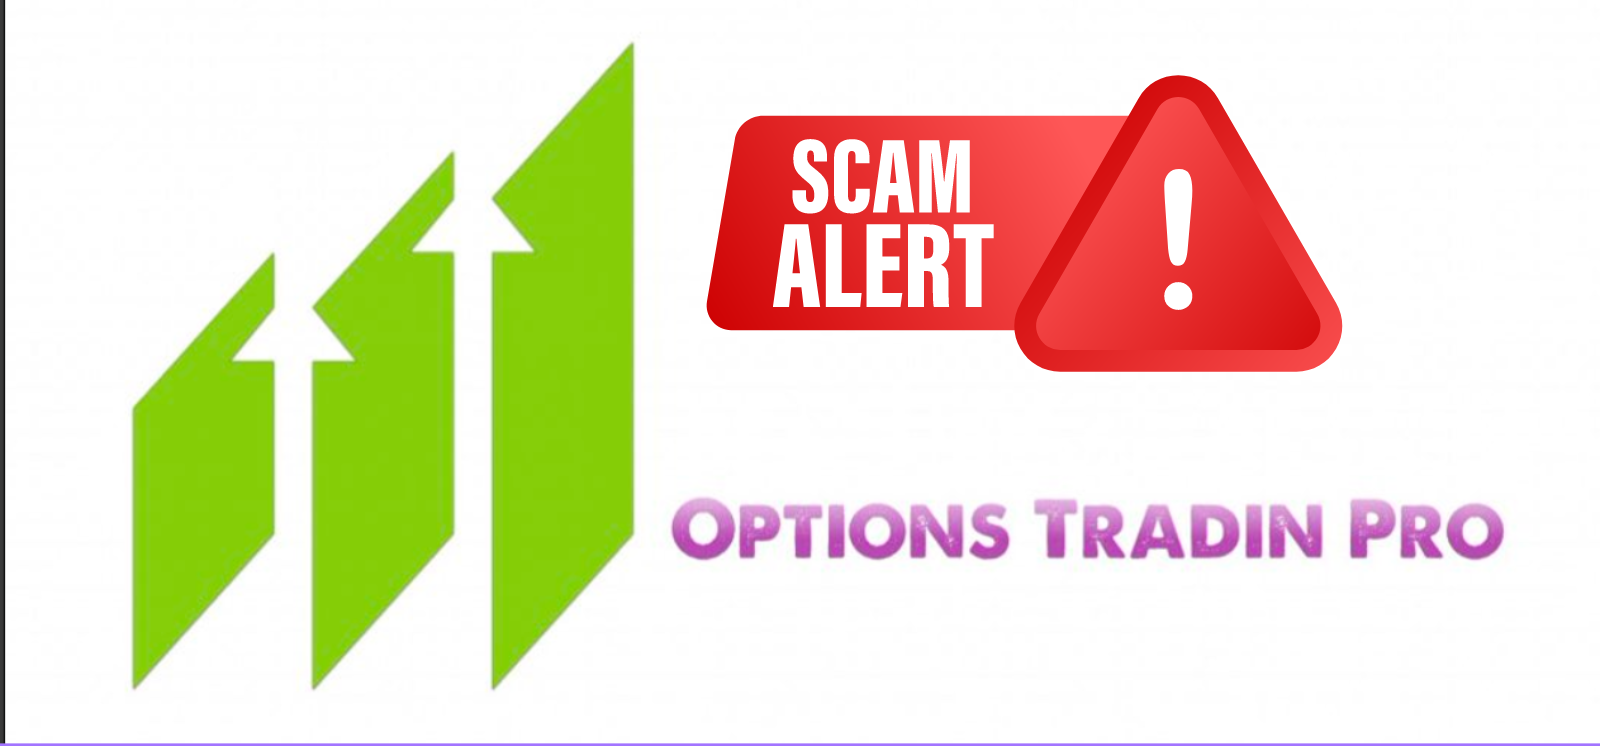 yi Options Trading Pro A Scam